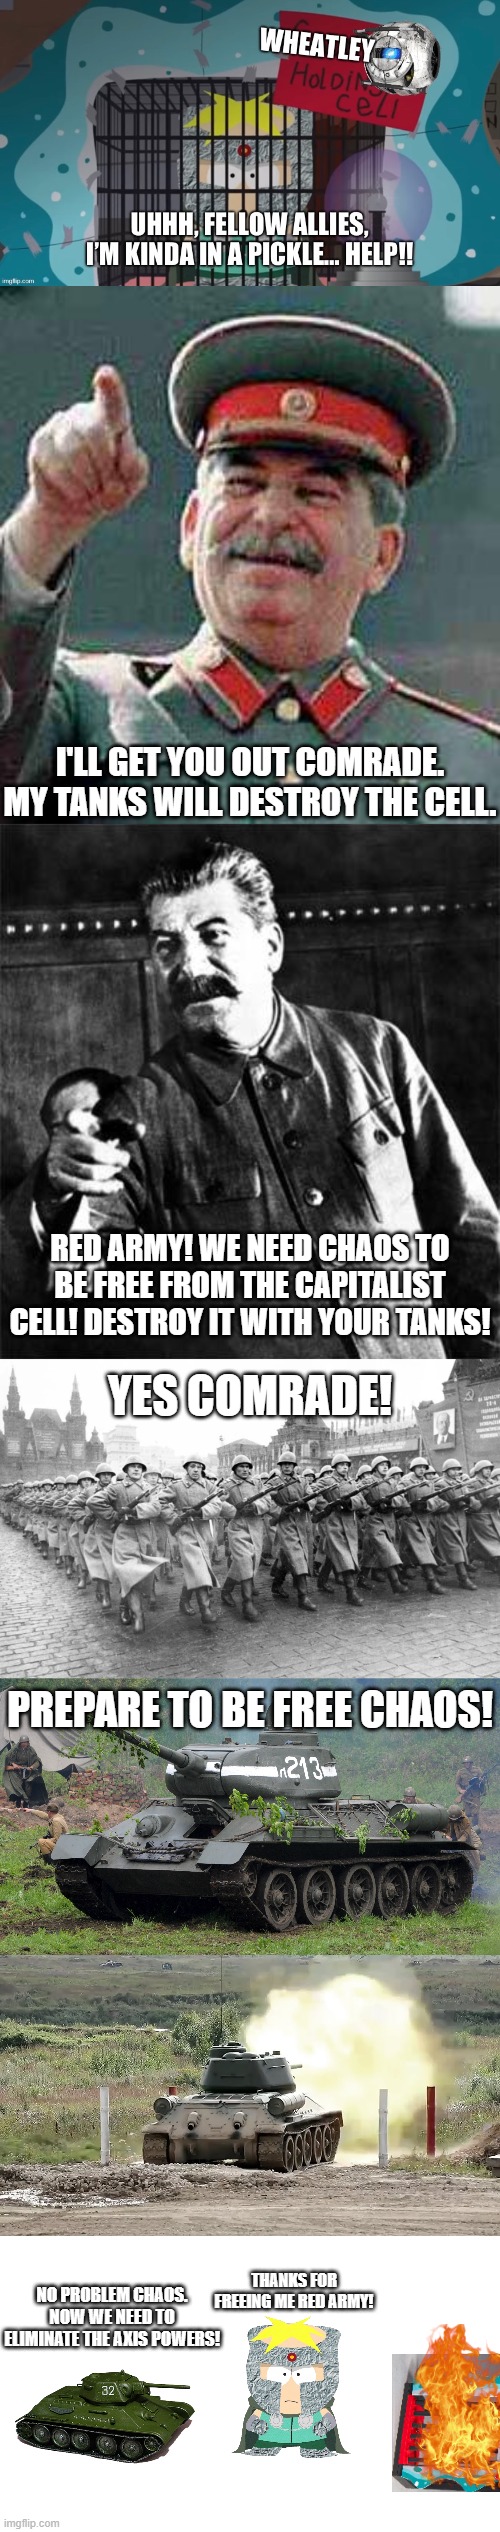 I'LL GET YOU OUT COMRADE. MY TANKS WILL DESTROY THE CELL. RED ARMY! WE NEED CHAOS TO BE FREE FROM THE CAPITALIST CELL! DESTROY IT WITH YOUR TANKS! YES COMRADE! PREPARE TO BE FREE CHAOS! THANKS FOR FREEING ME RED ARMY! NO PROBLEM CHAOS. NOW WE NEED TO ELIMINATE THE AXIS POWERS! | image tagged in stalin says,stalin,blank white template,joseph stalin,red army,gulag | made w/ Imgflip meme maker